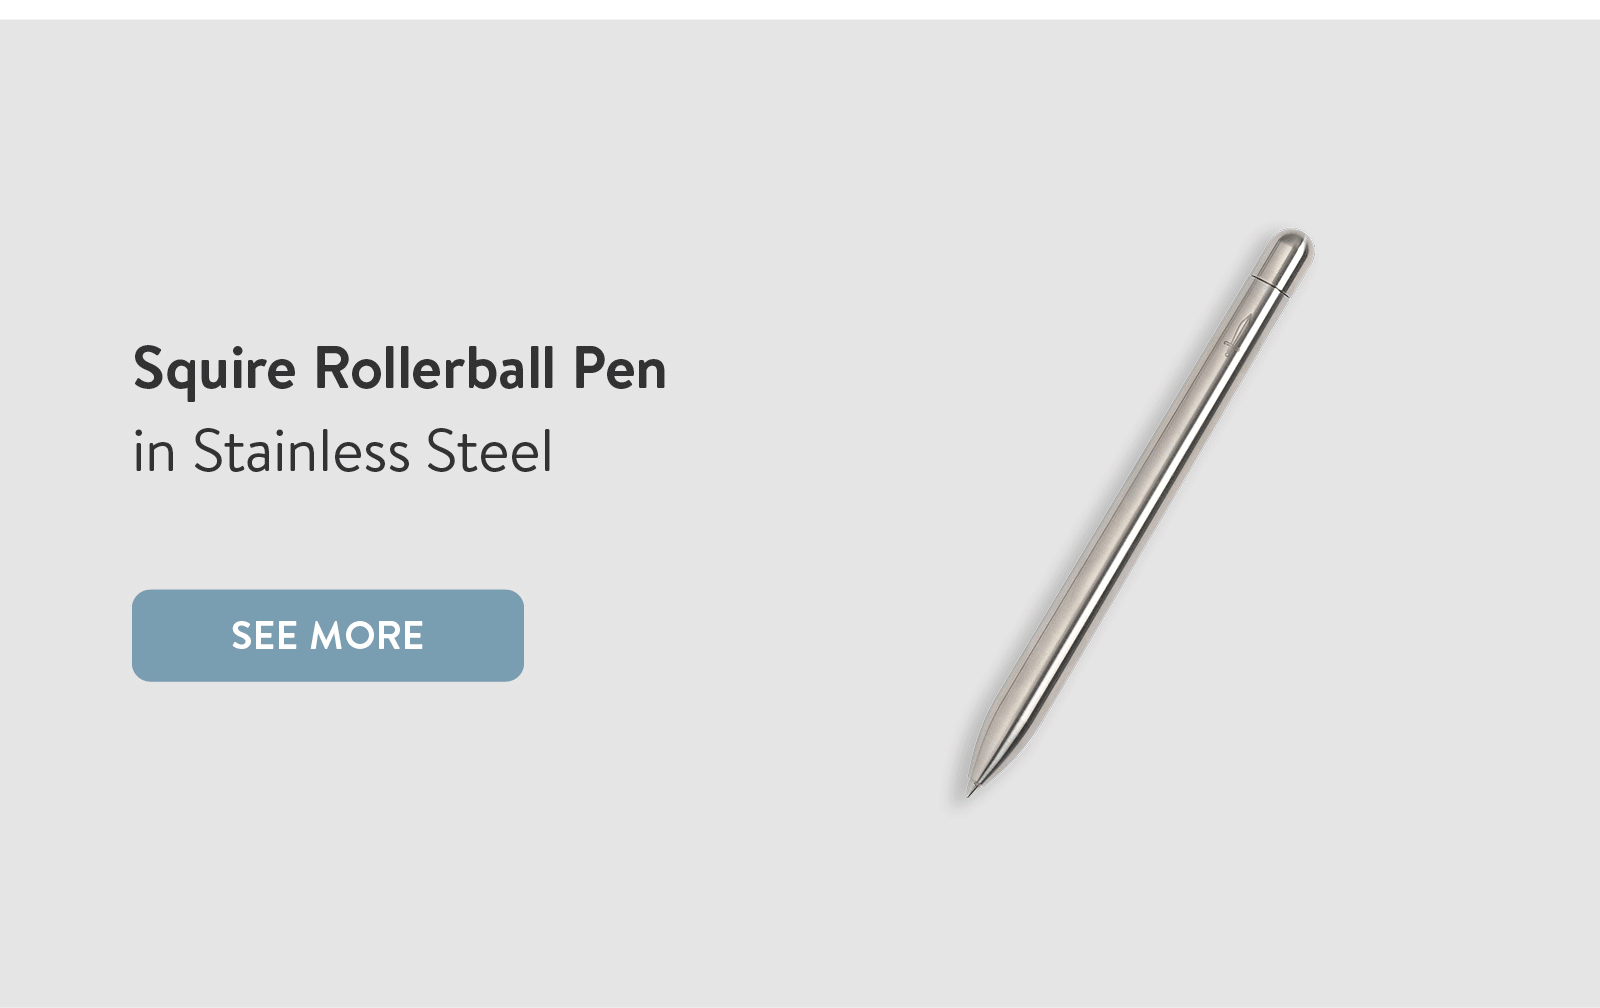 Squire Rollerball Pen in Stainless Steel. See more ?